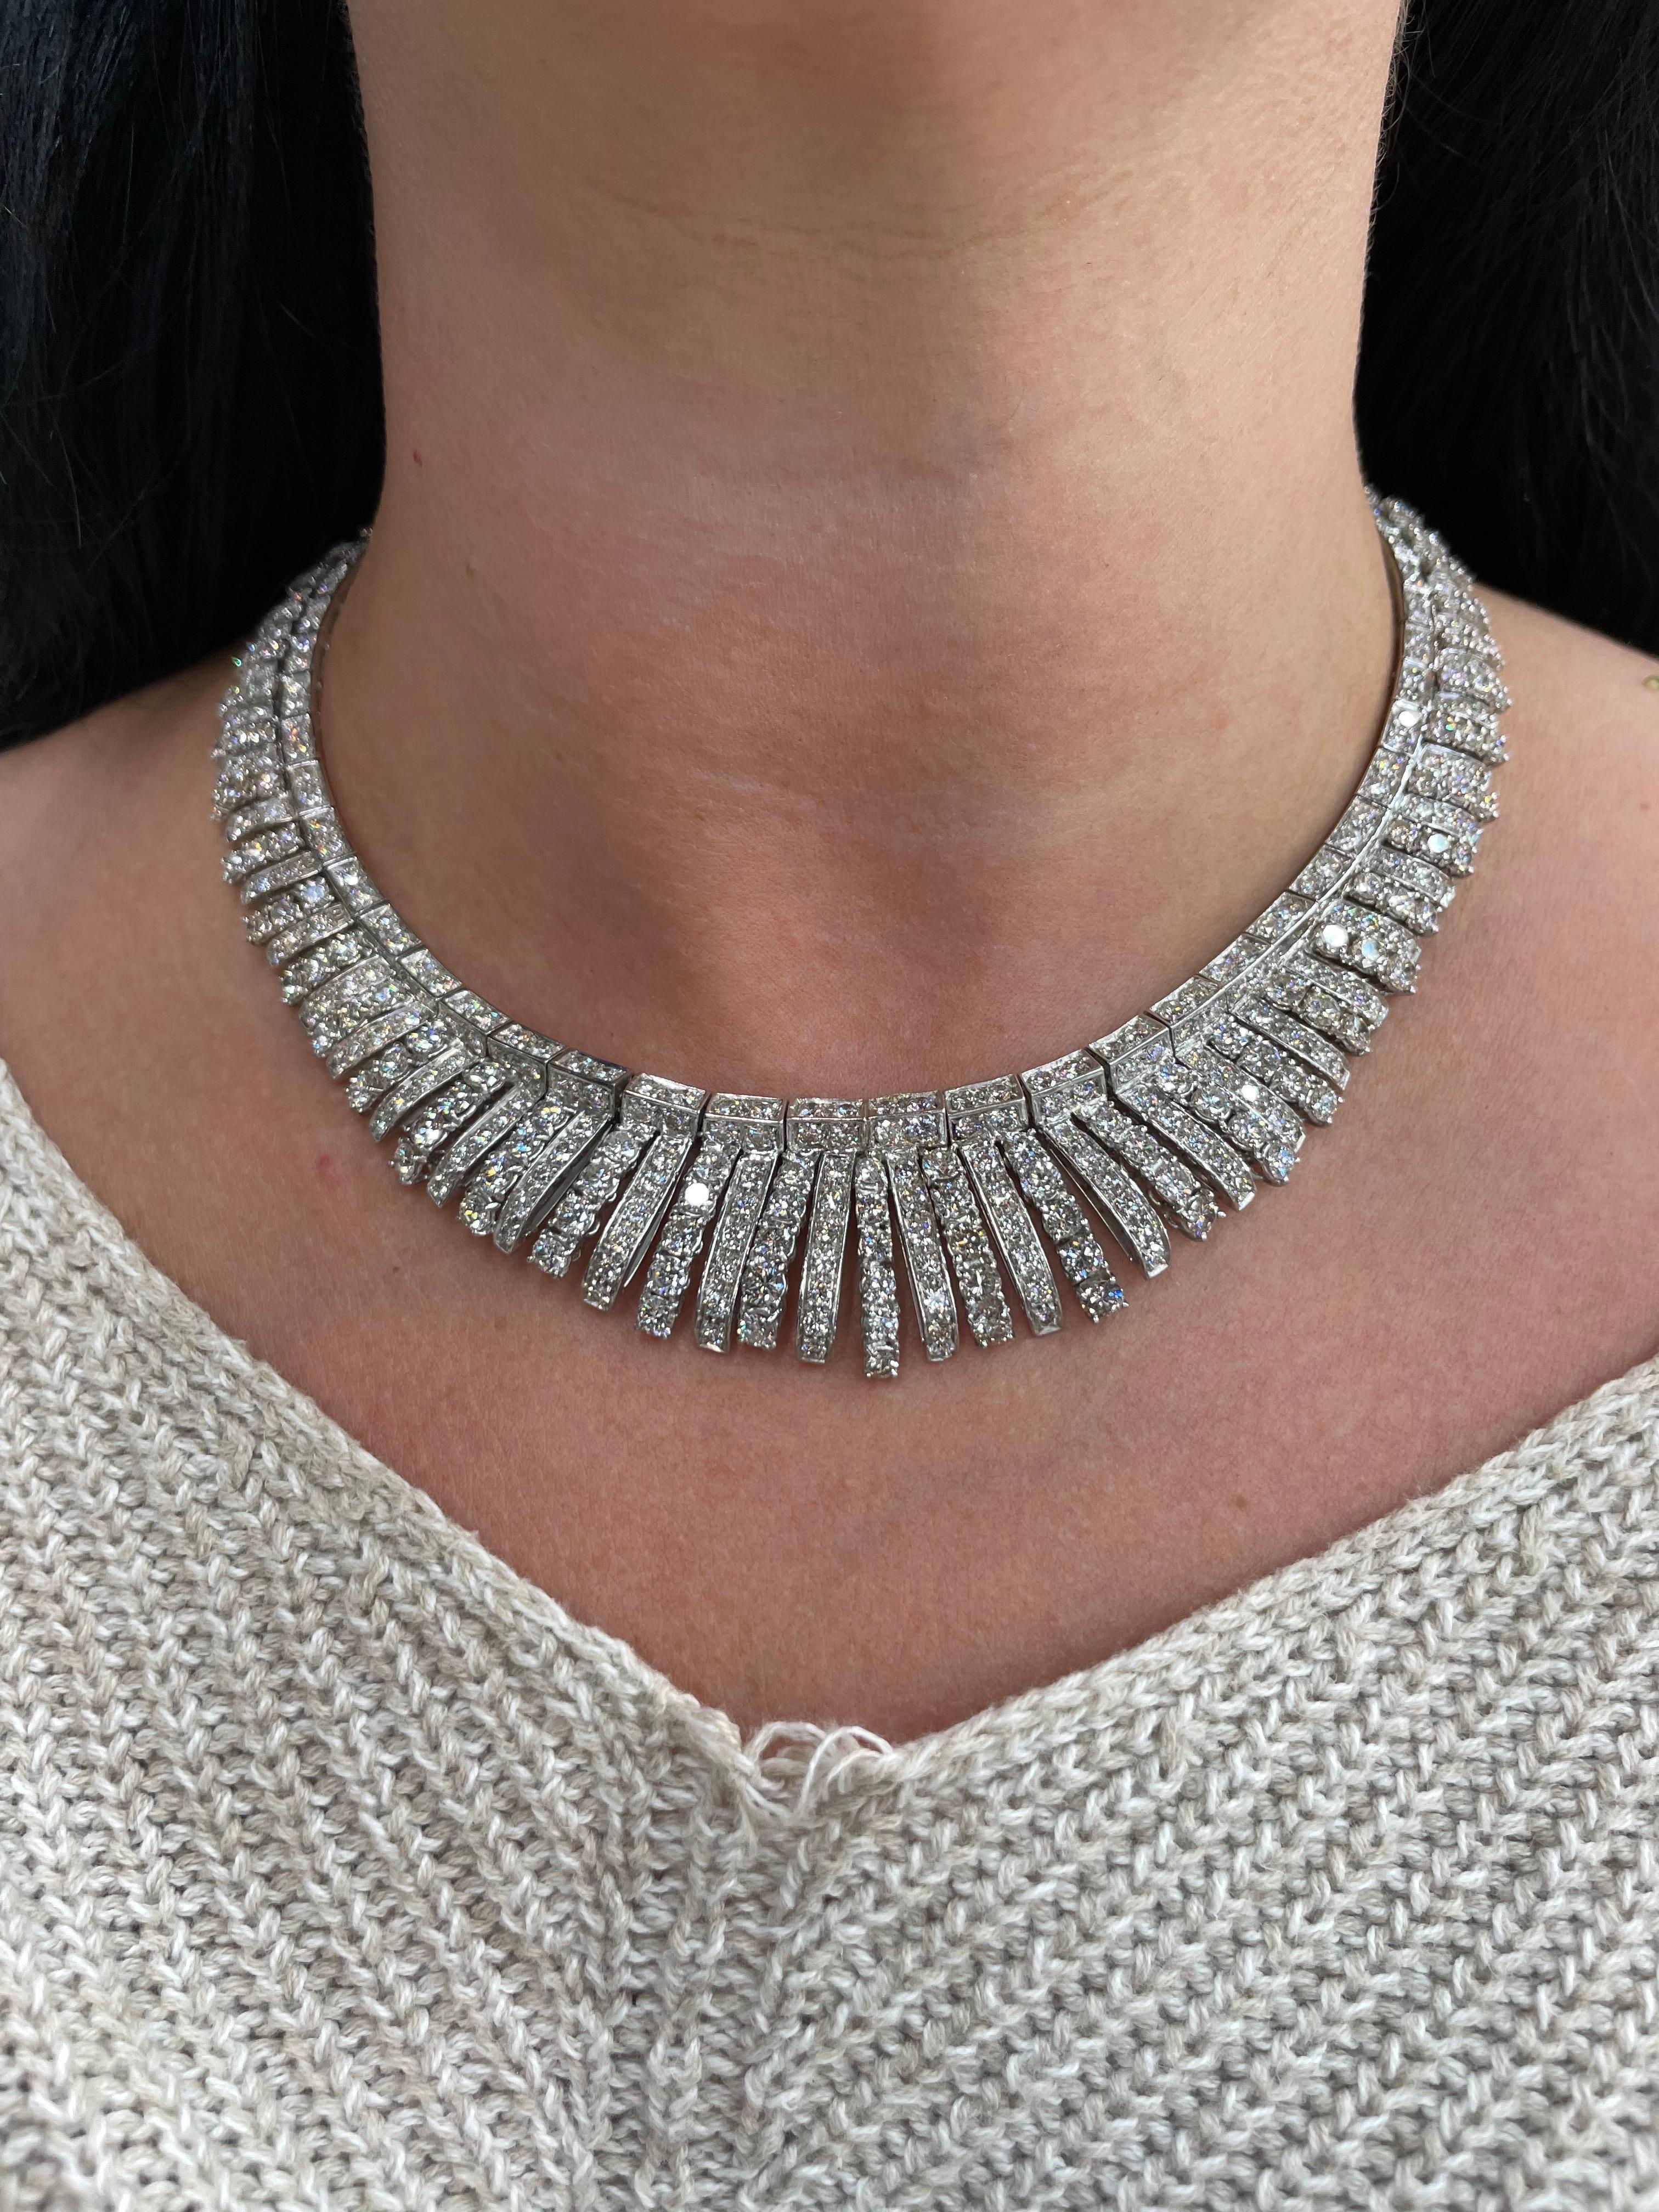 Vintage 18 karat white gold bib collar necklace featuring numerous round brilliants weighing approximately 66 carats, 113.5 grams. Very comfortable on the necklace! 
A real showstopper!